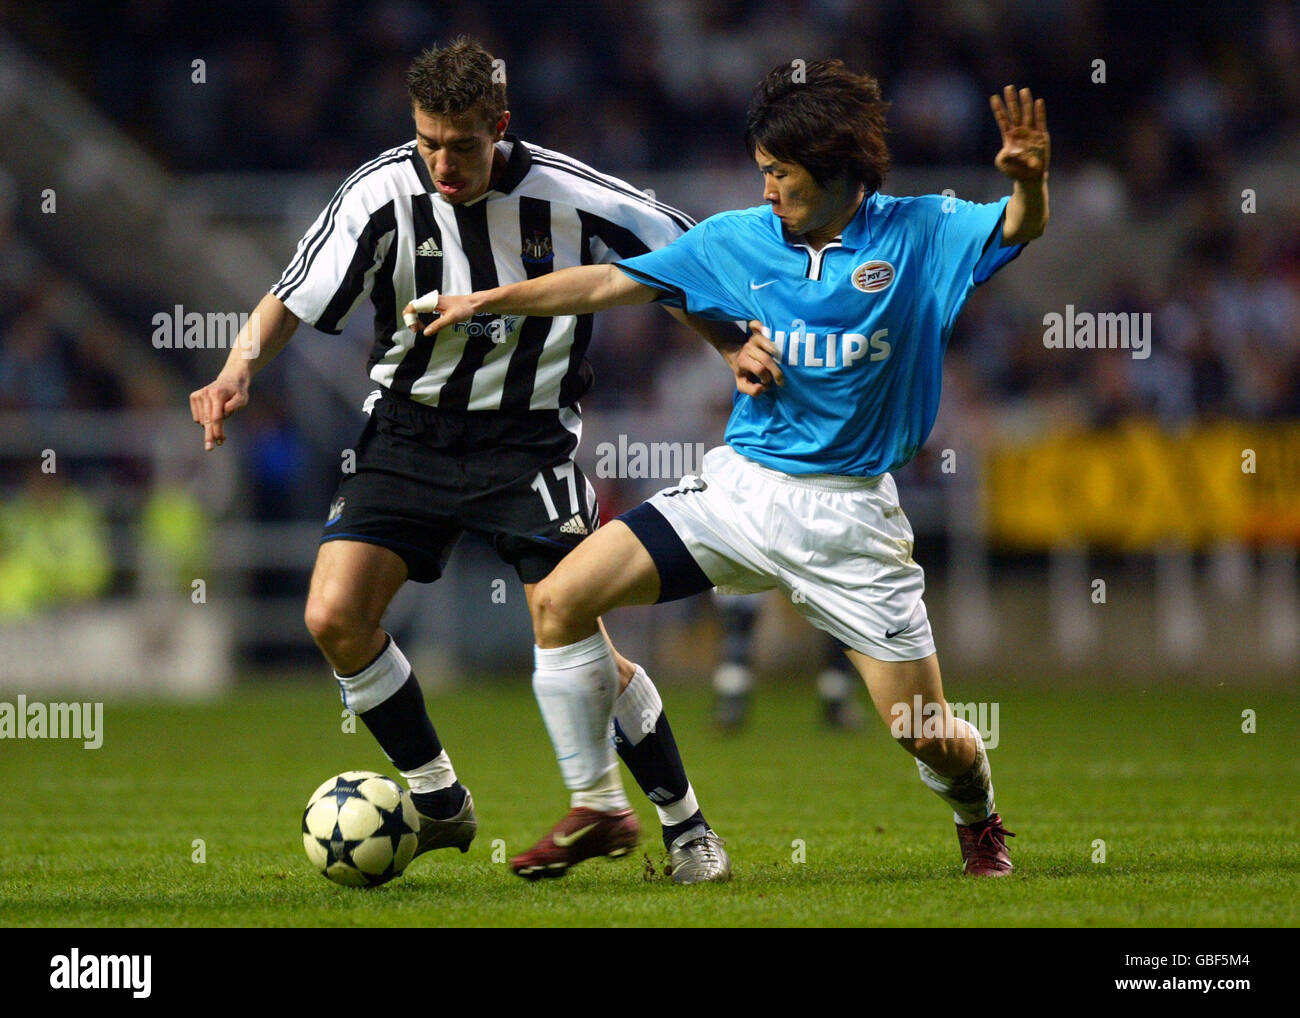 Newcastle United's Darren Ambrose (l) tries to hold off the challenge from PSV Eindhoven's Ji-Sung Park (r) Stock Photo